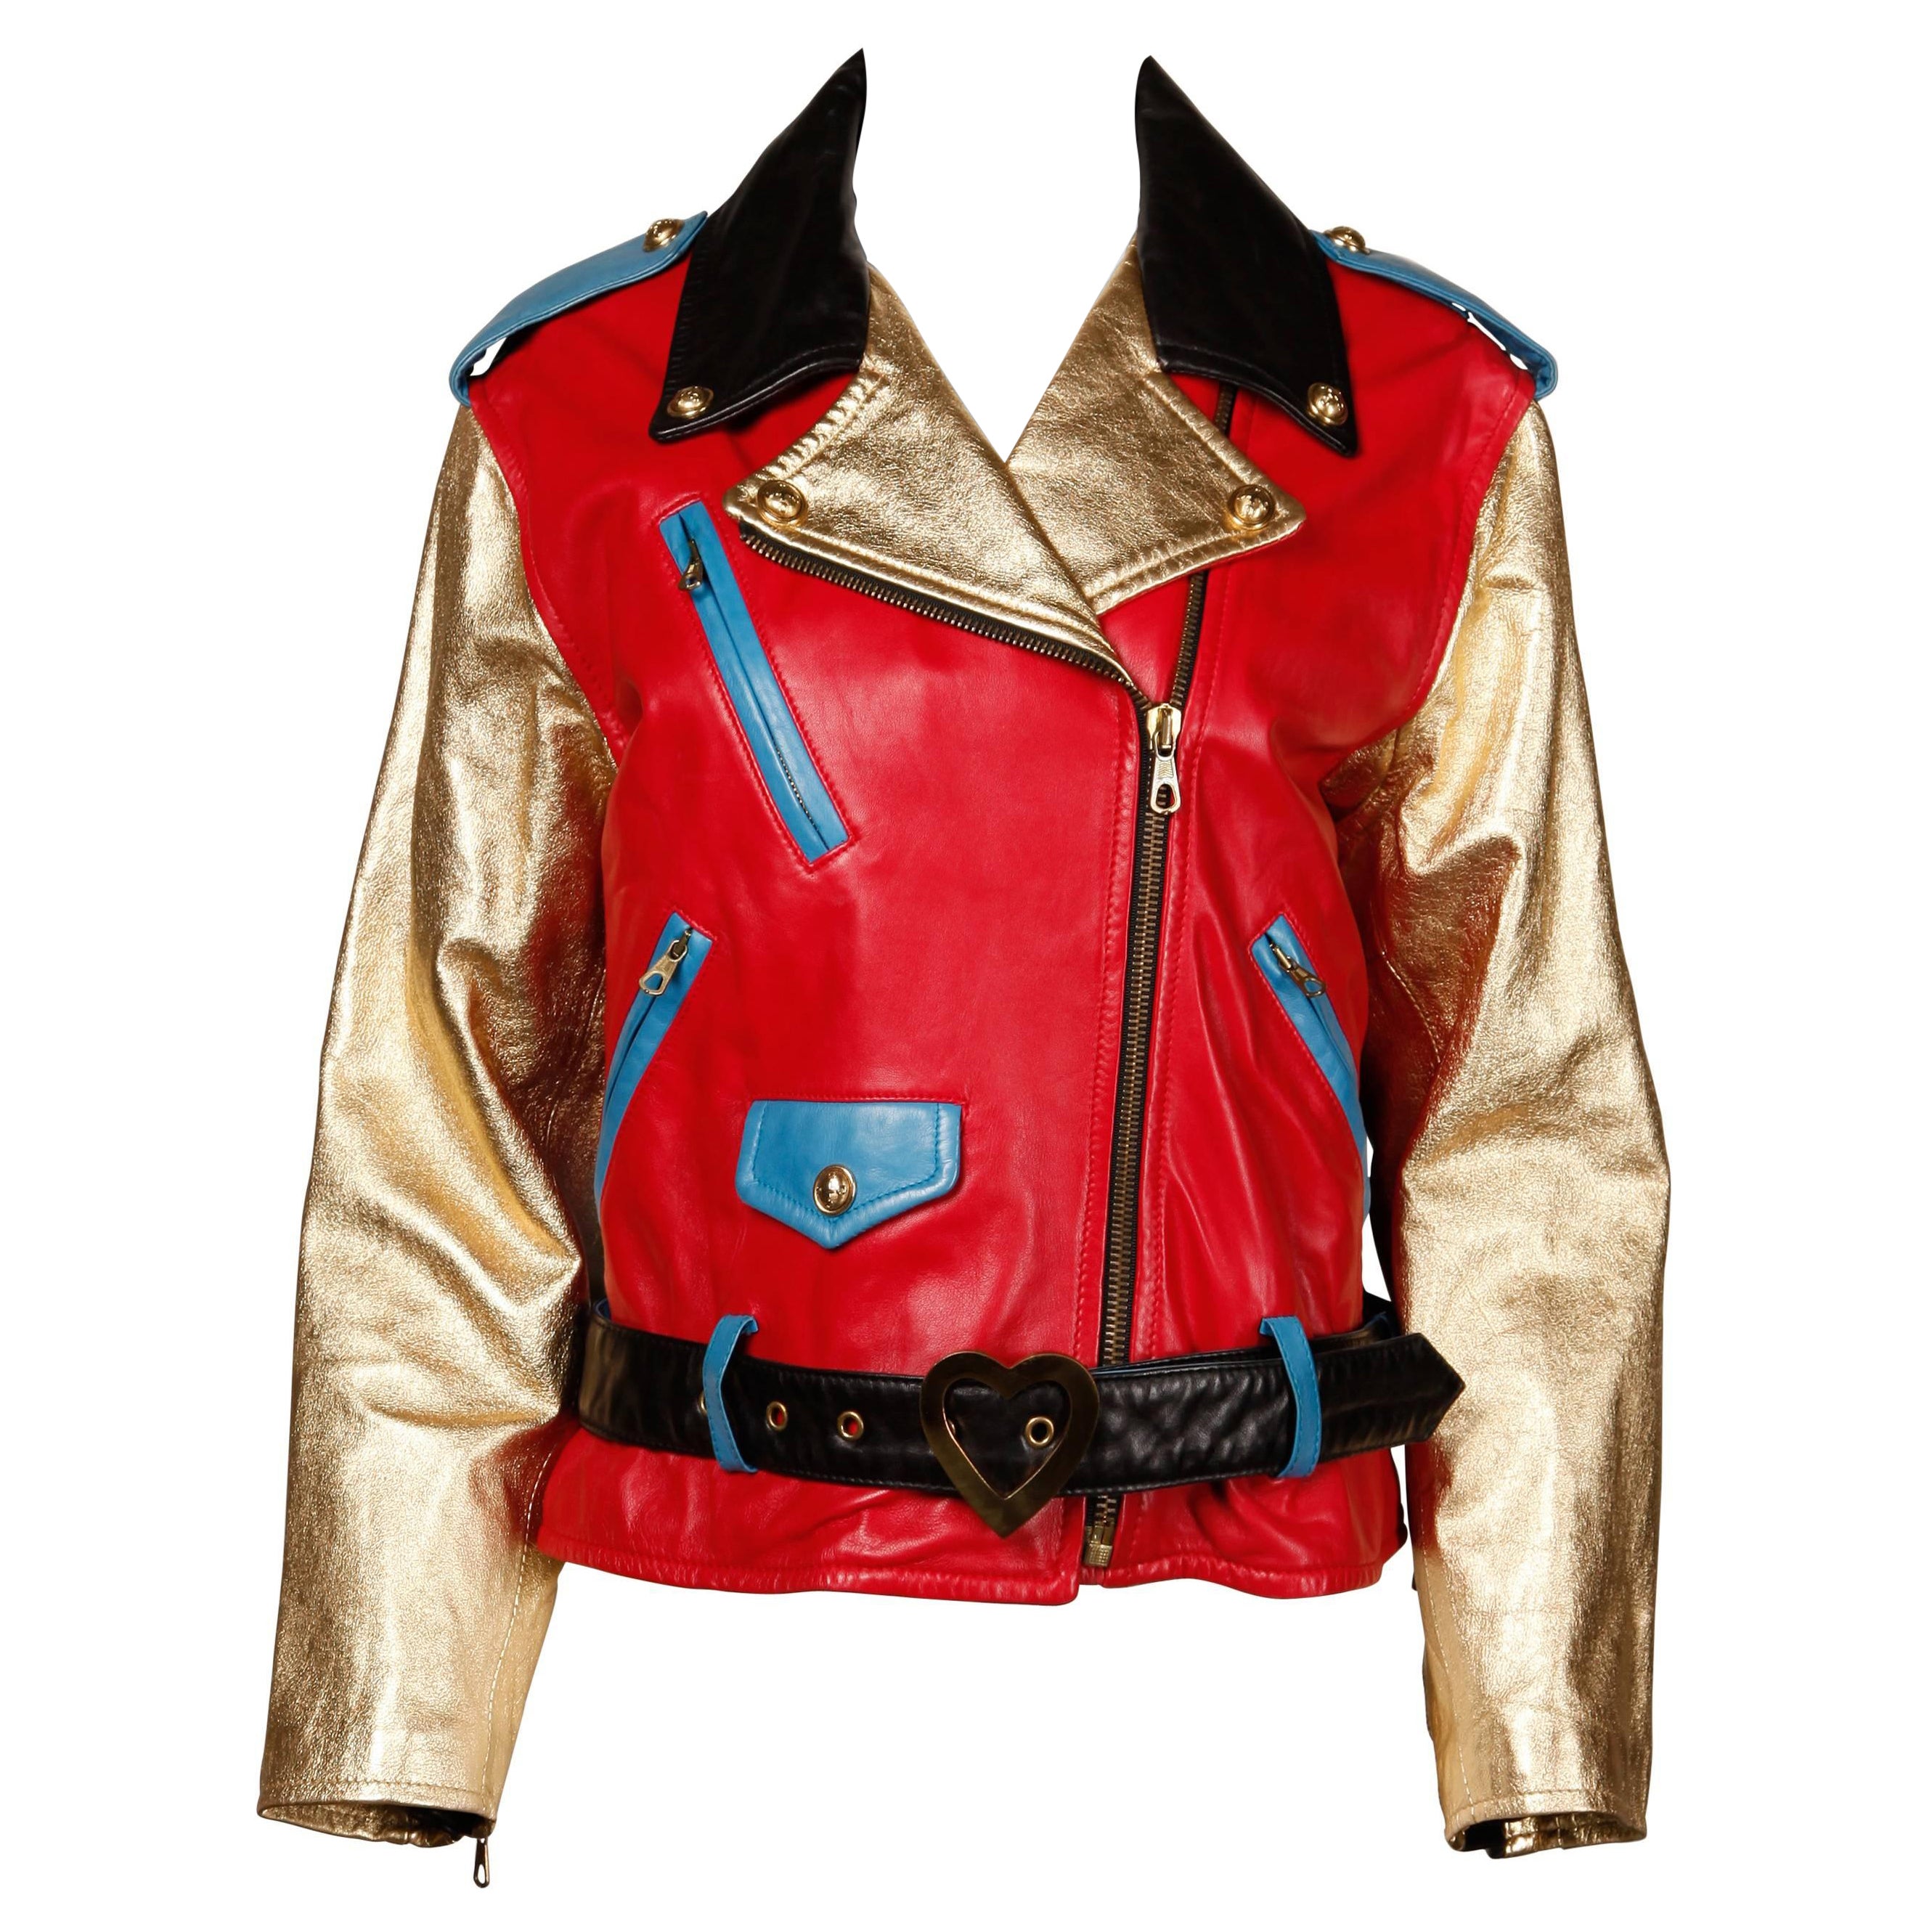 Moschino Leather Vintage Metallic Gold Color Block Motorcycle Jacket, 1990s 